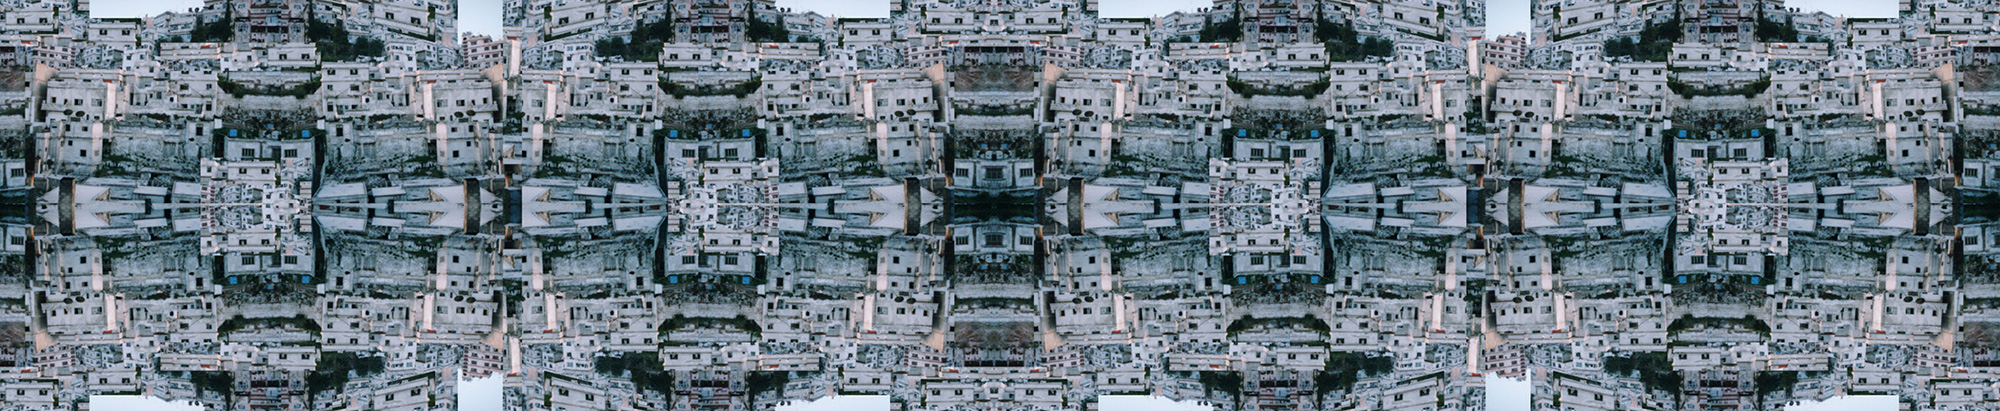 A 2004 artwork by Caitlin Masley, titled “city4ver1,” depicting a photograph of buildings digitally rendered to create symmetrical geometric patterns.